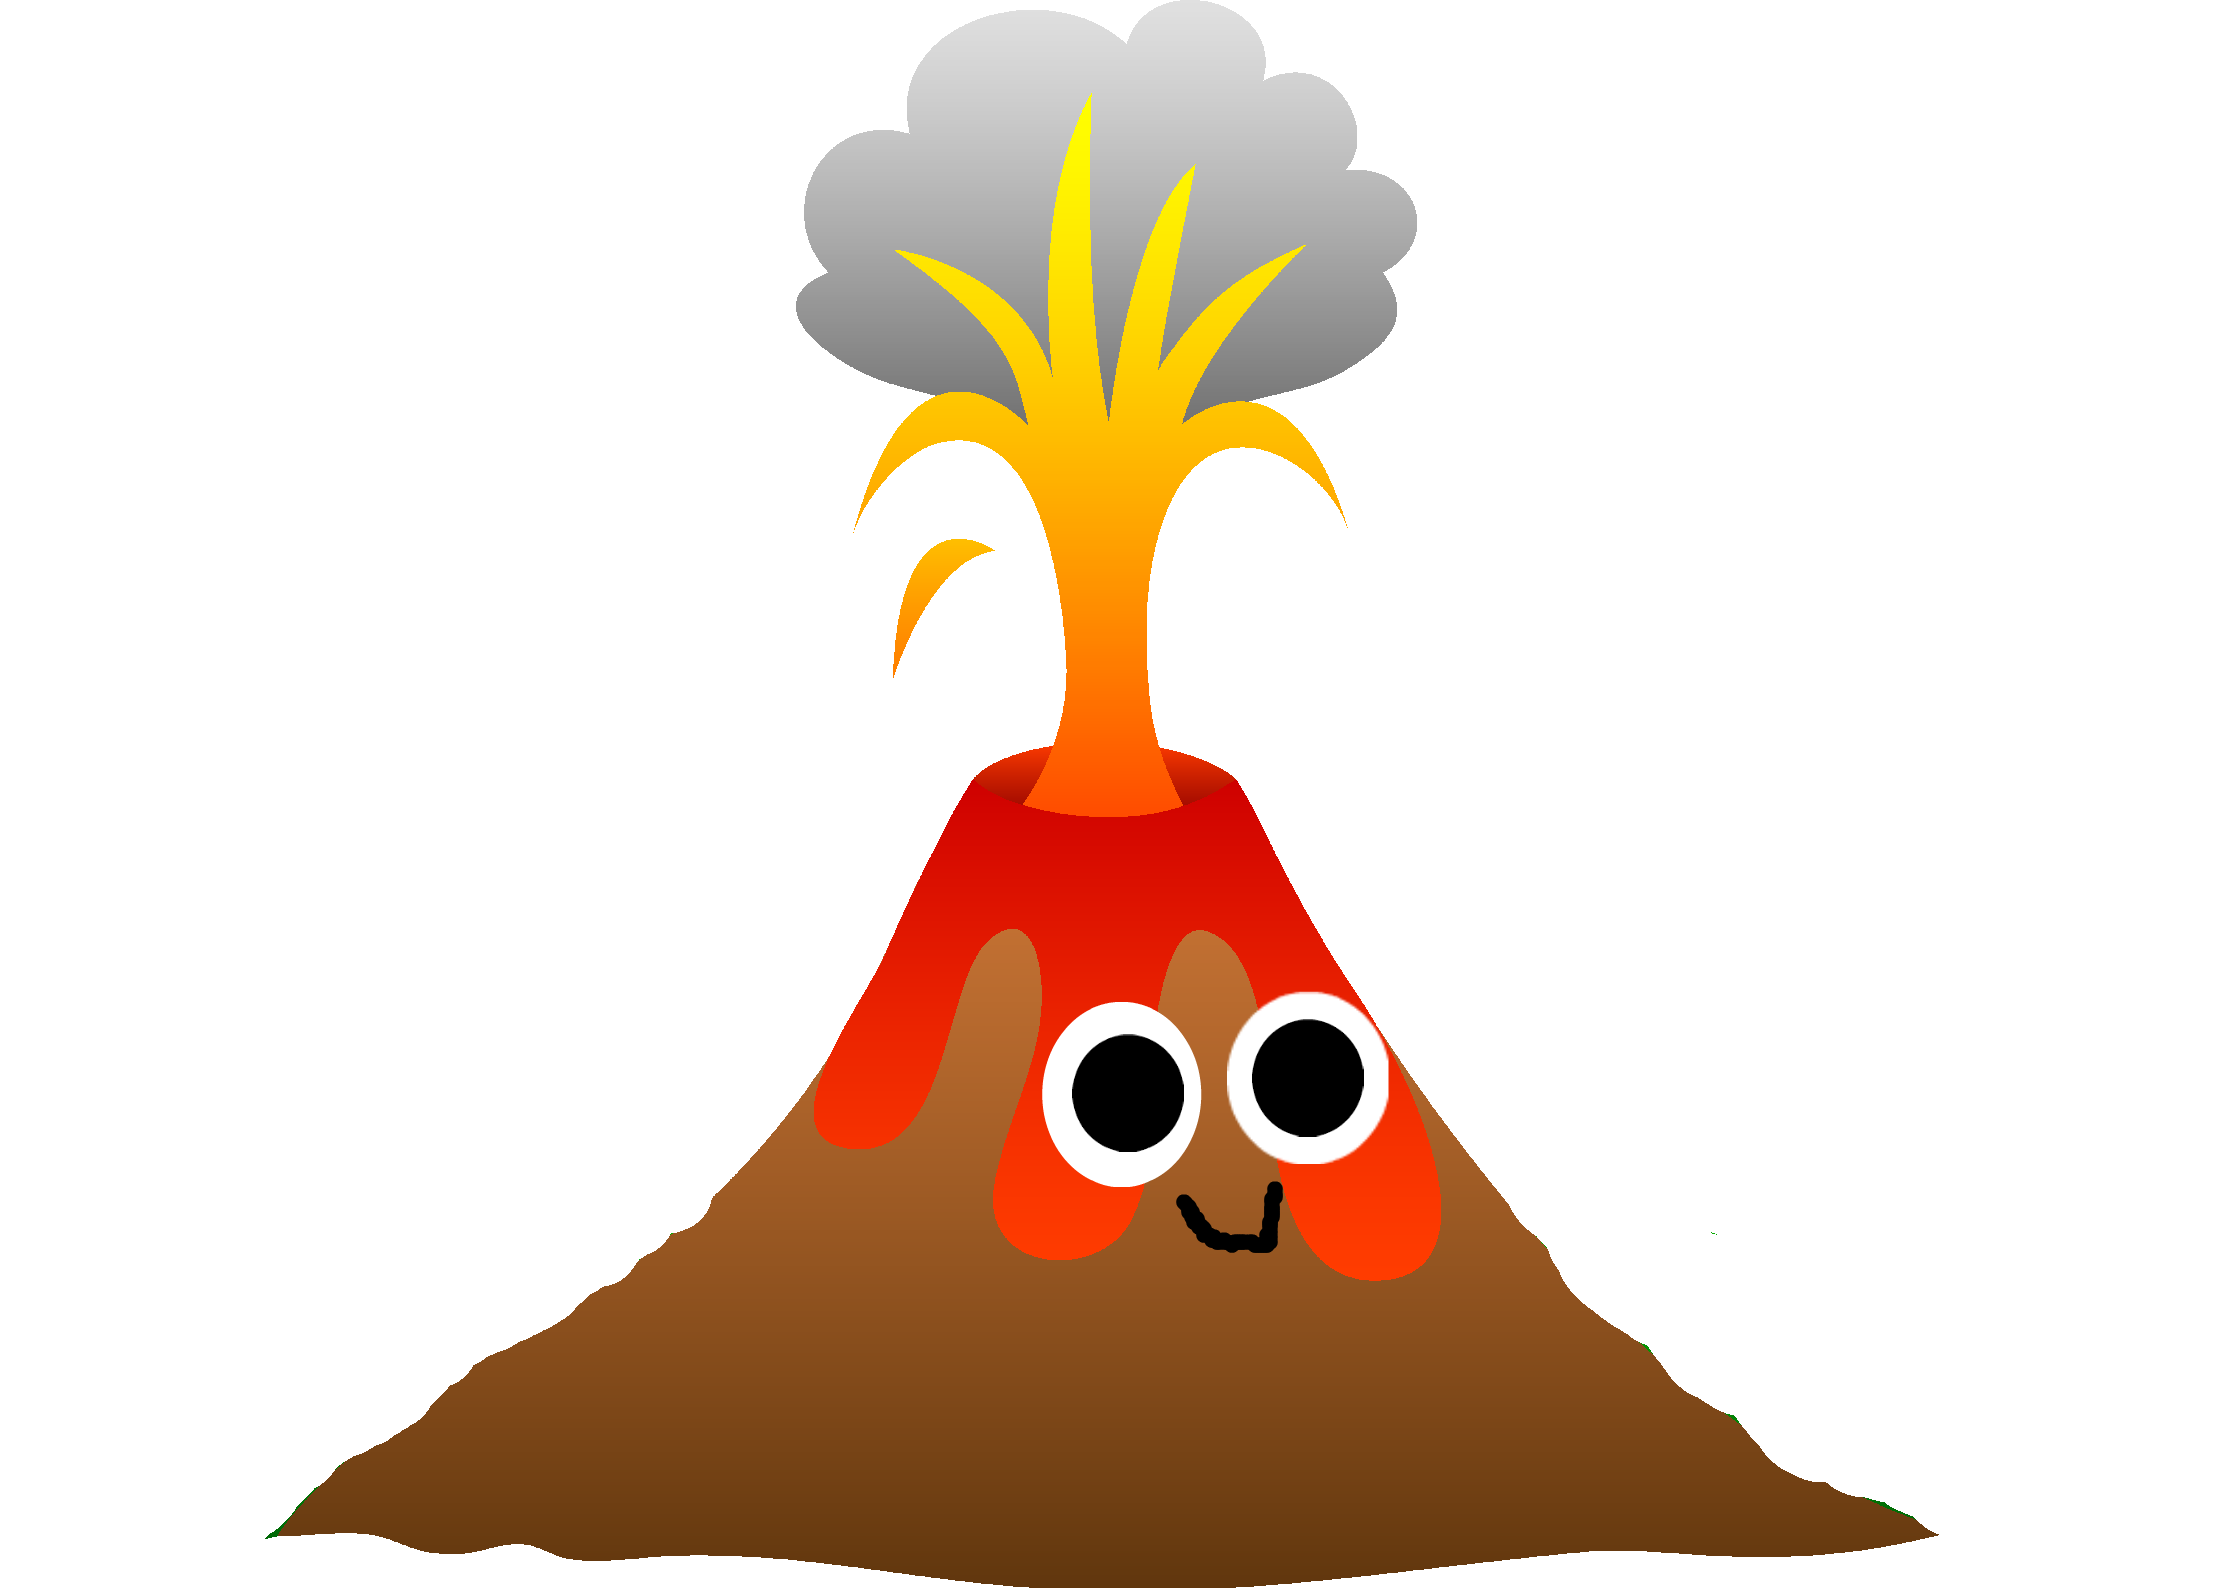 Volcano eruption drawing at. Mountain clipart underwater